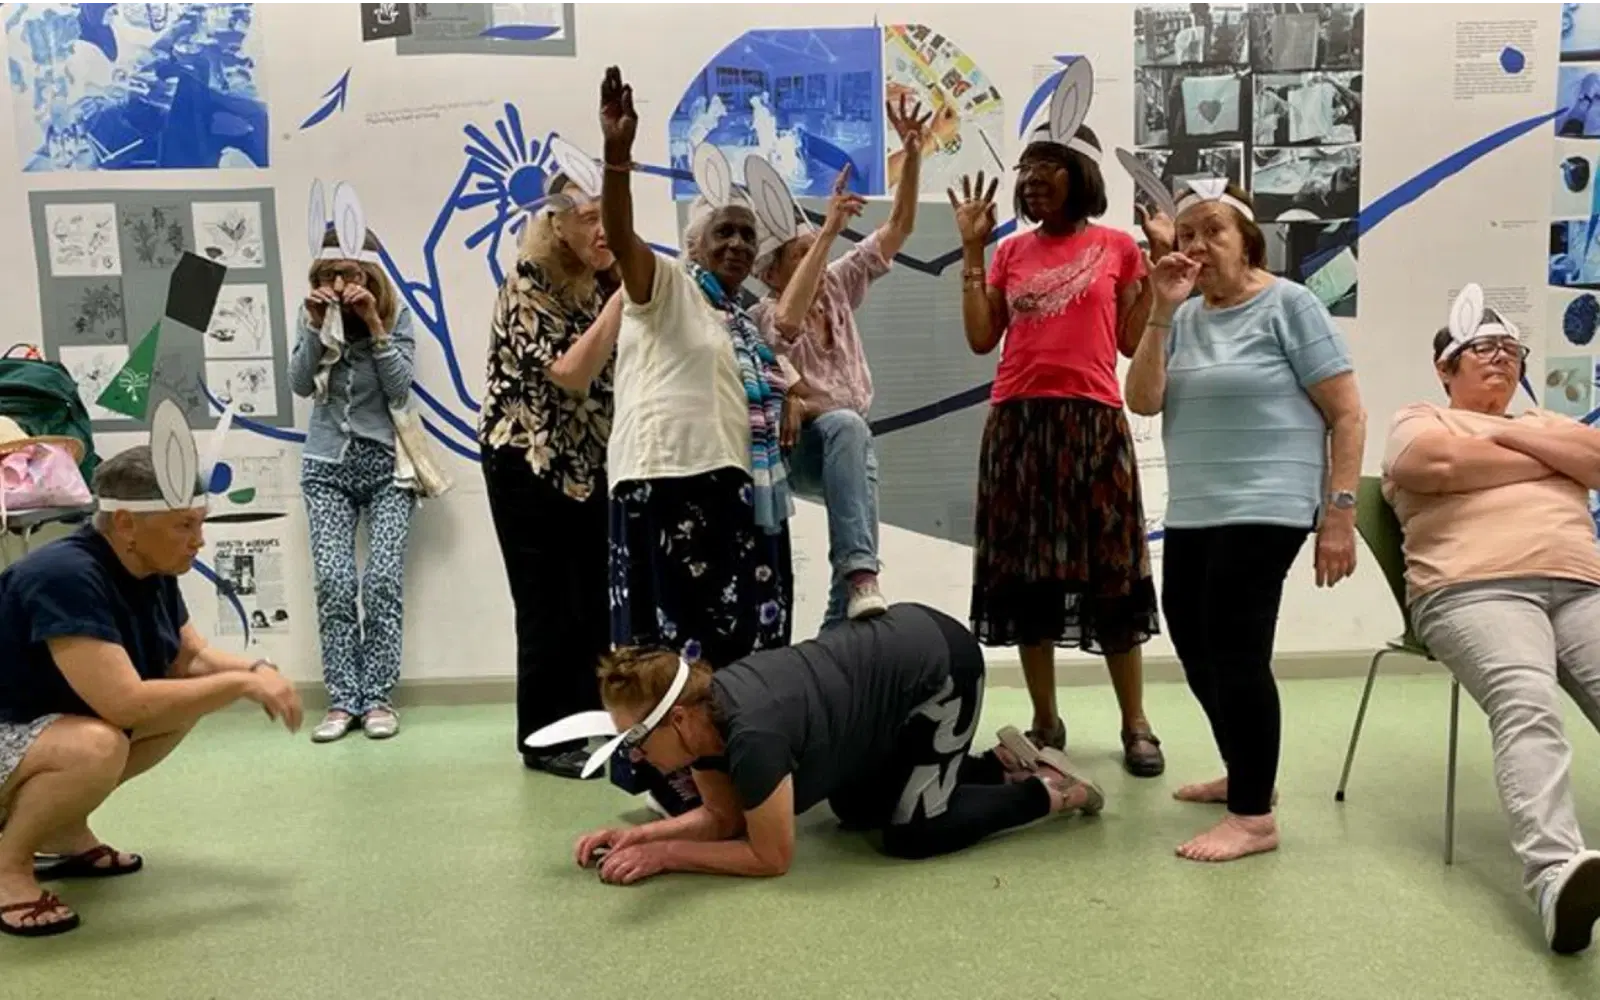 9 people (60+) rehearsing a play (The Glass Flower Society)